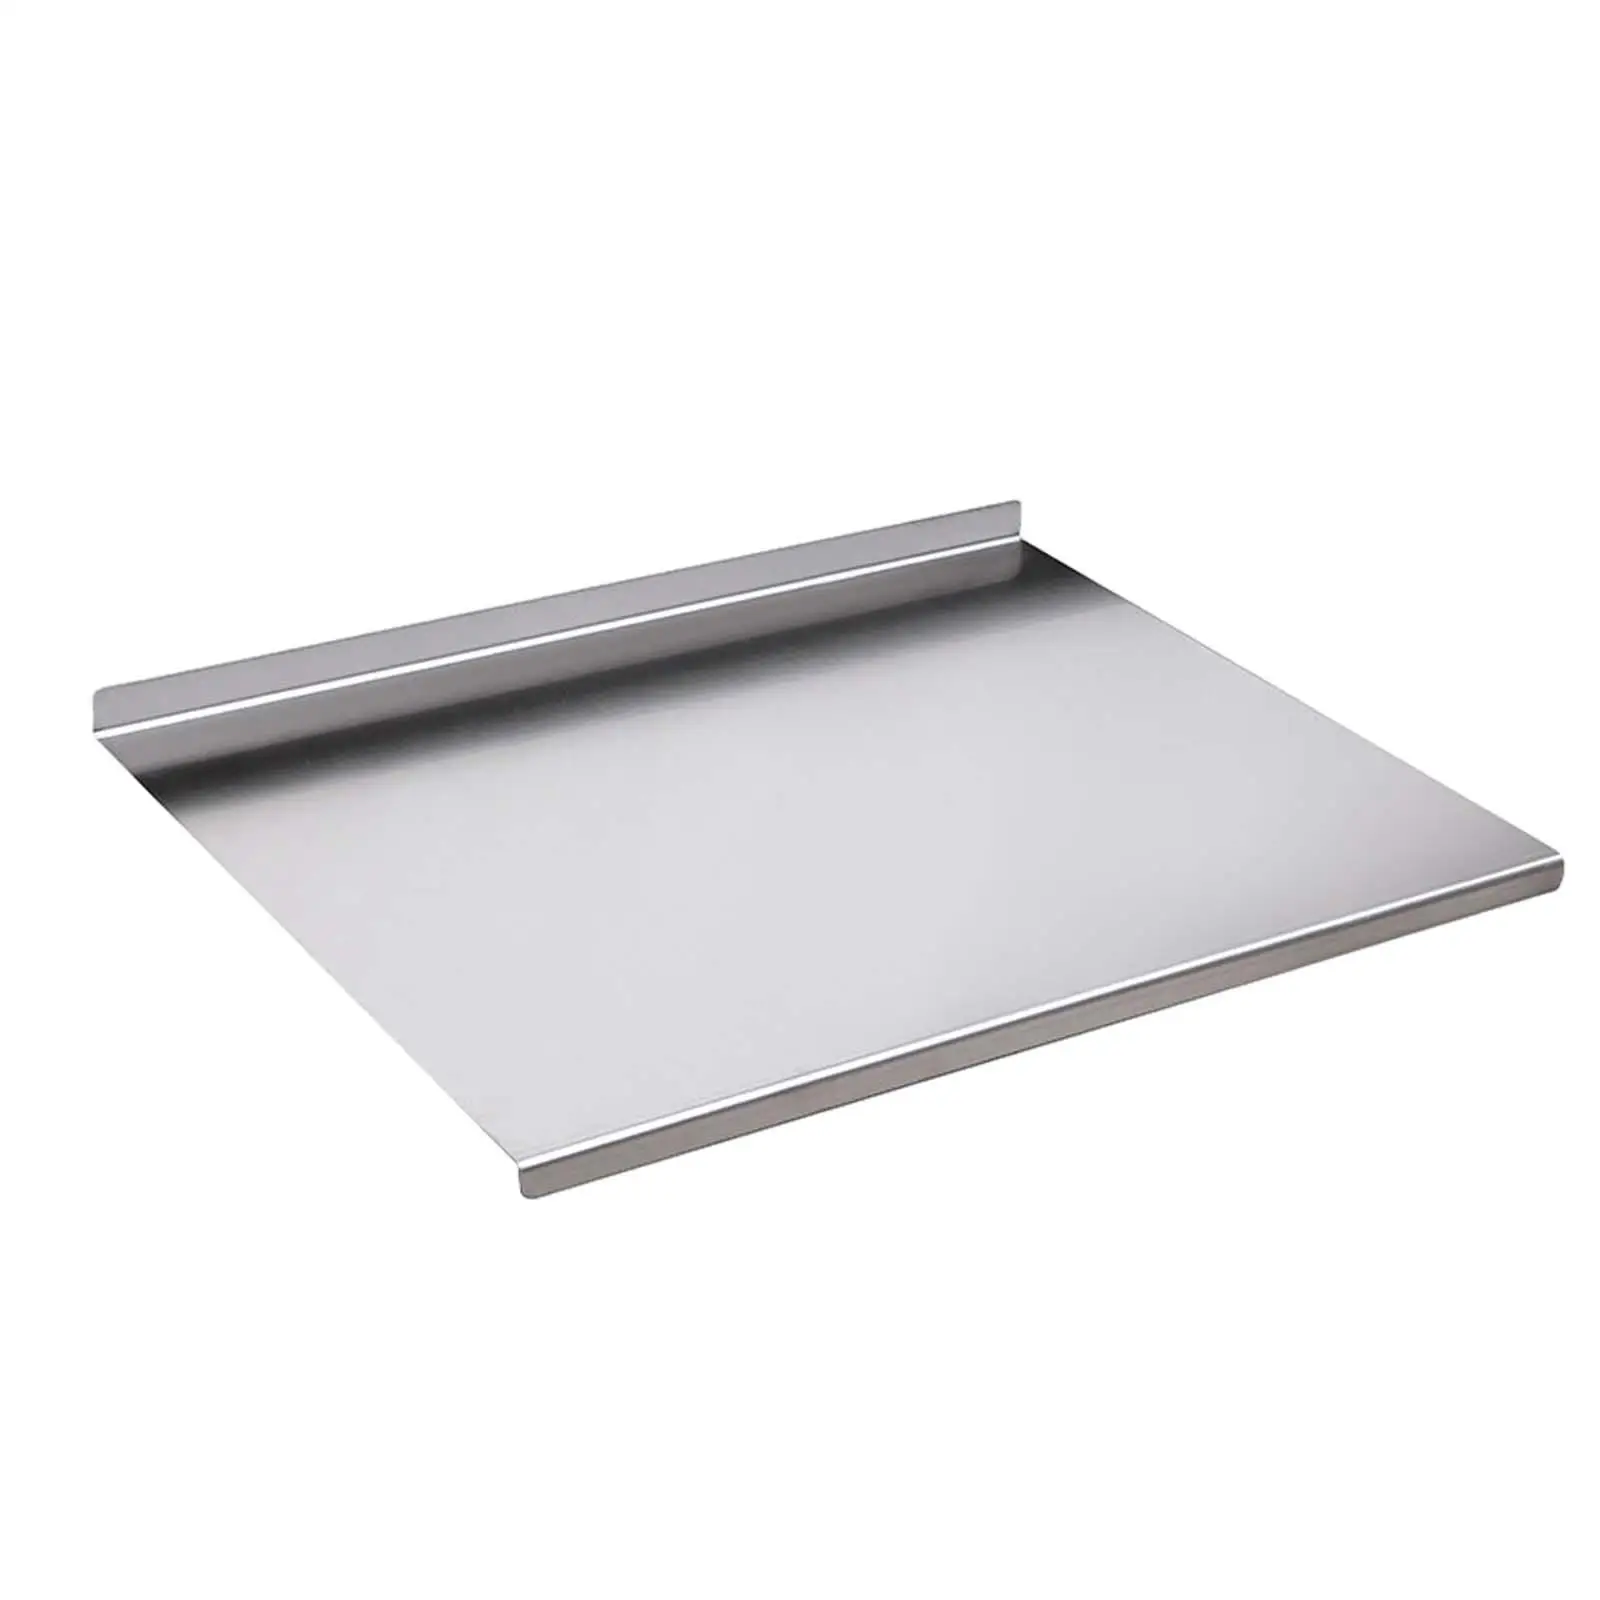 Stainless Steel Chopping Board Nonstick Easy to Clean Kitchen Shaped Hem Sturdy Smooth Surface Extra Large Thick